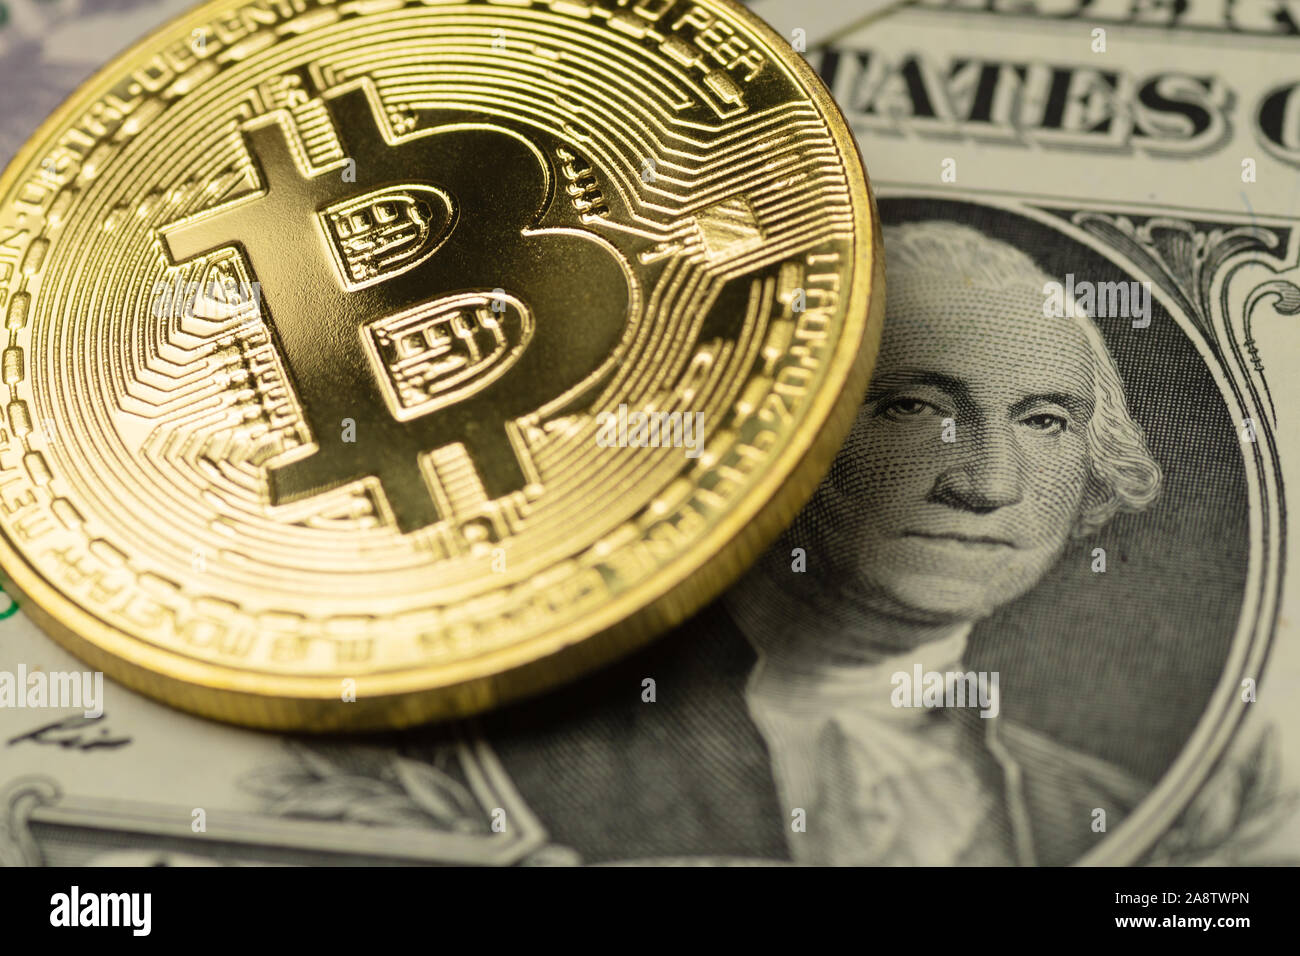 Golden Bitcoin cryptocurrency coin covering the image of George Washington on one US Dollar banknote Stock Photo